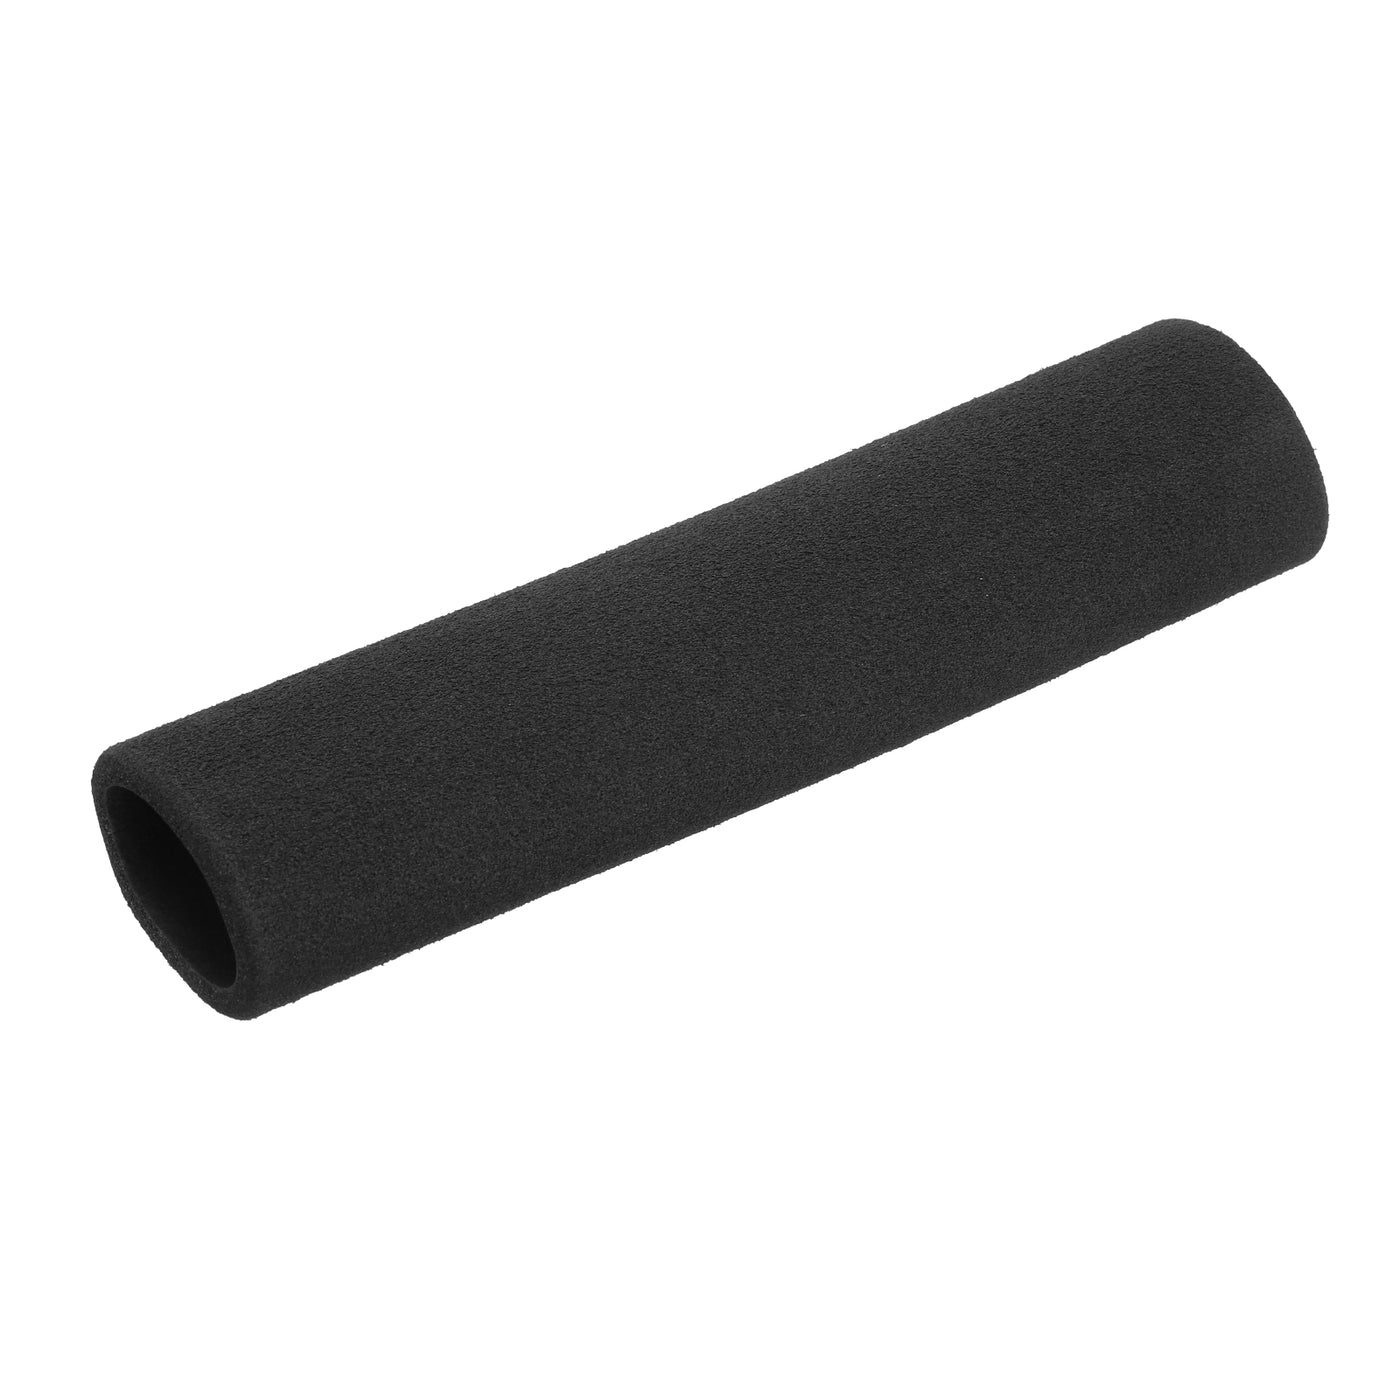 uxcell Uxcell Pipe Insulation Tube Foam Tubing for Handle Grip Support 31mm ID 41mm OD 195mm Heat Preservation Black